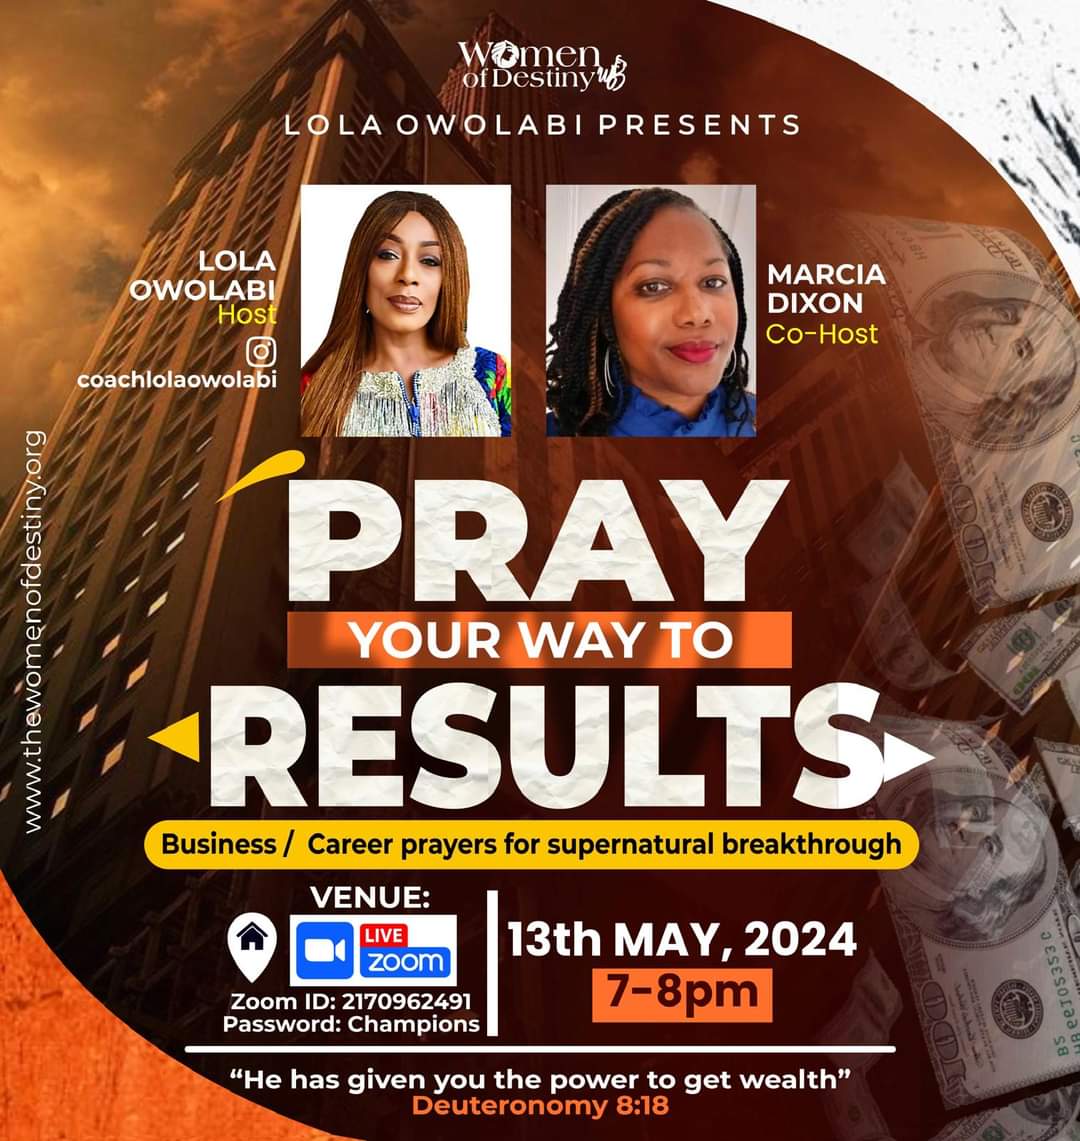 TAKES PLACE TONIGHT If you are a business owner wou are invited to join this prayer meeting Monday 13 May at 7pm. We'll be praying for God's direction, blessing, and favour on our businesses. Come to network on line, hear testimonials from business owners and to pray. Zoom ID: